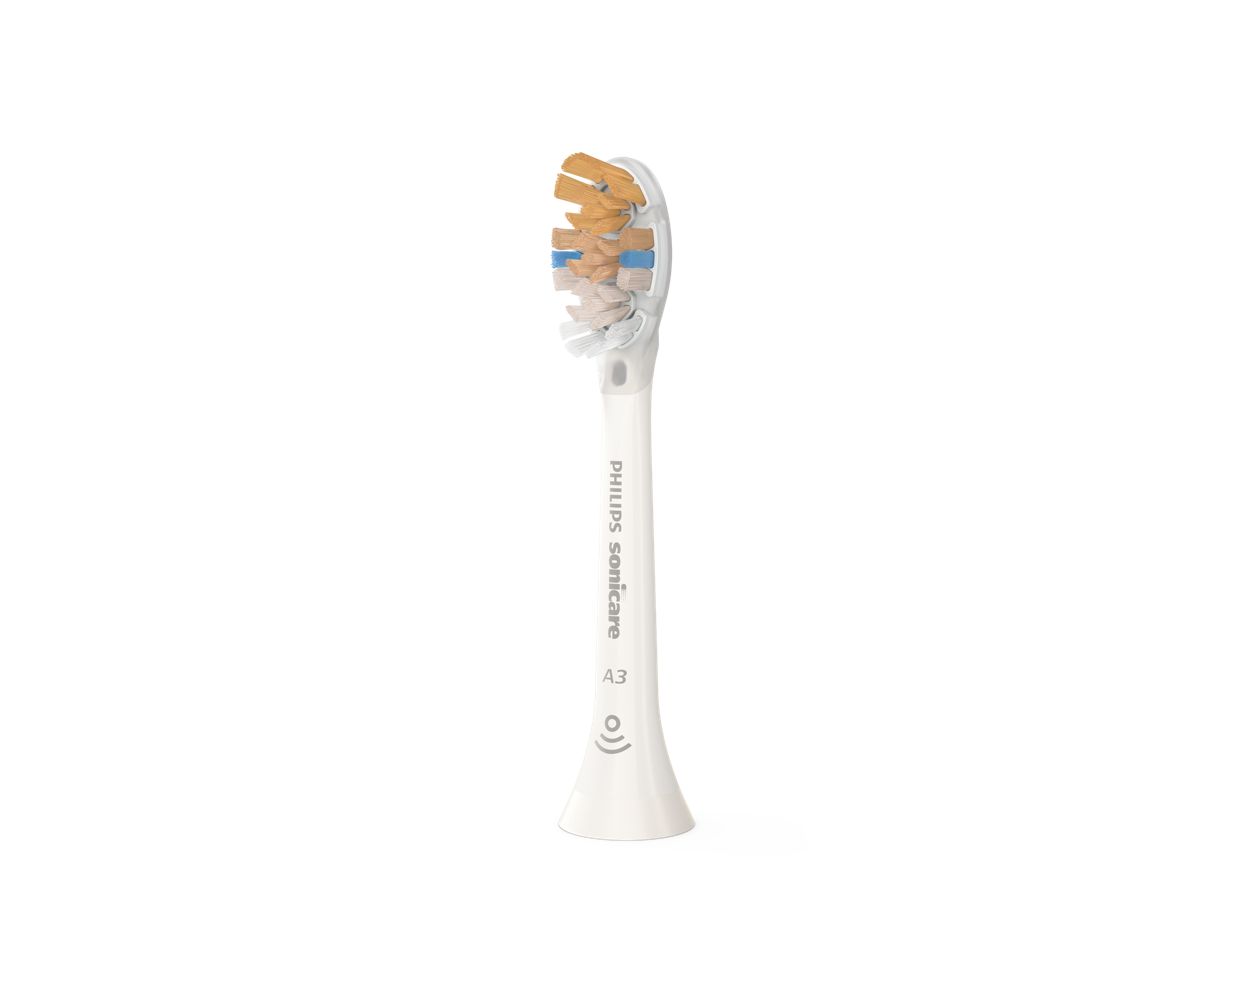 A3 Premium All-in-One Standard sonic toothbrush heads HX9091/19